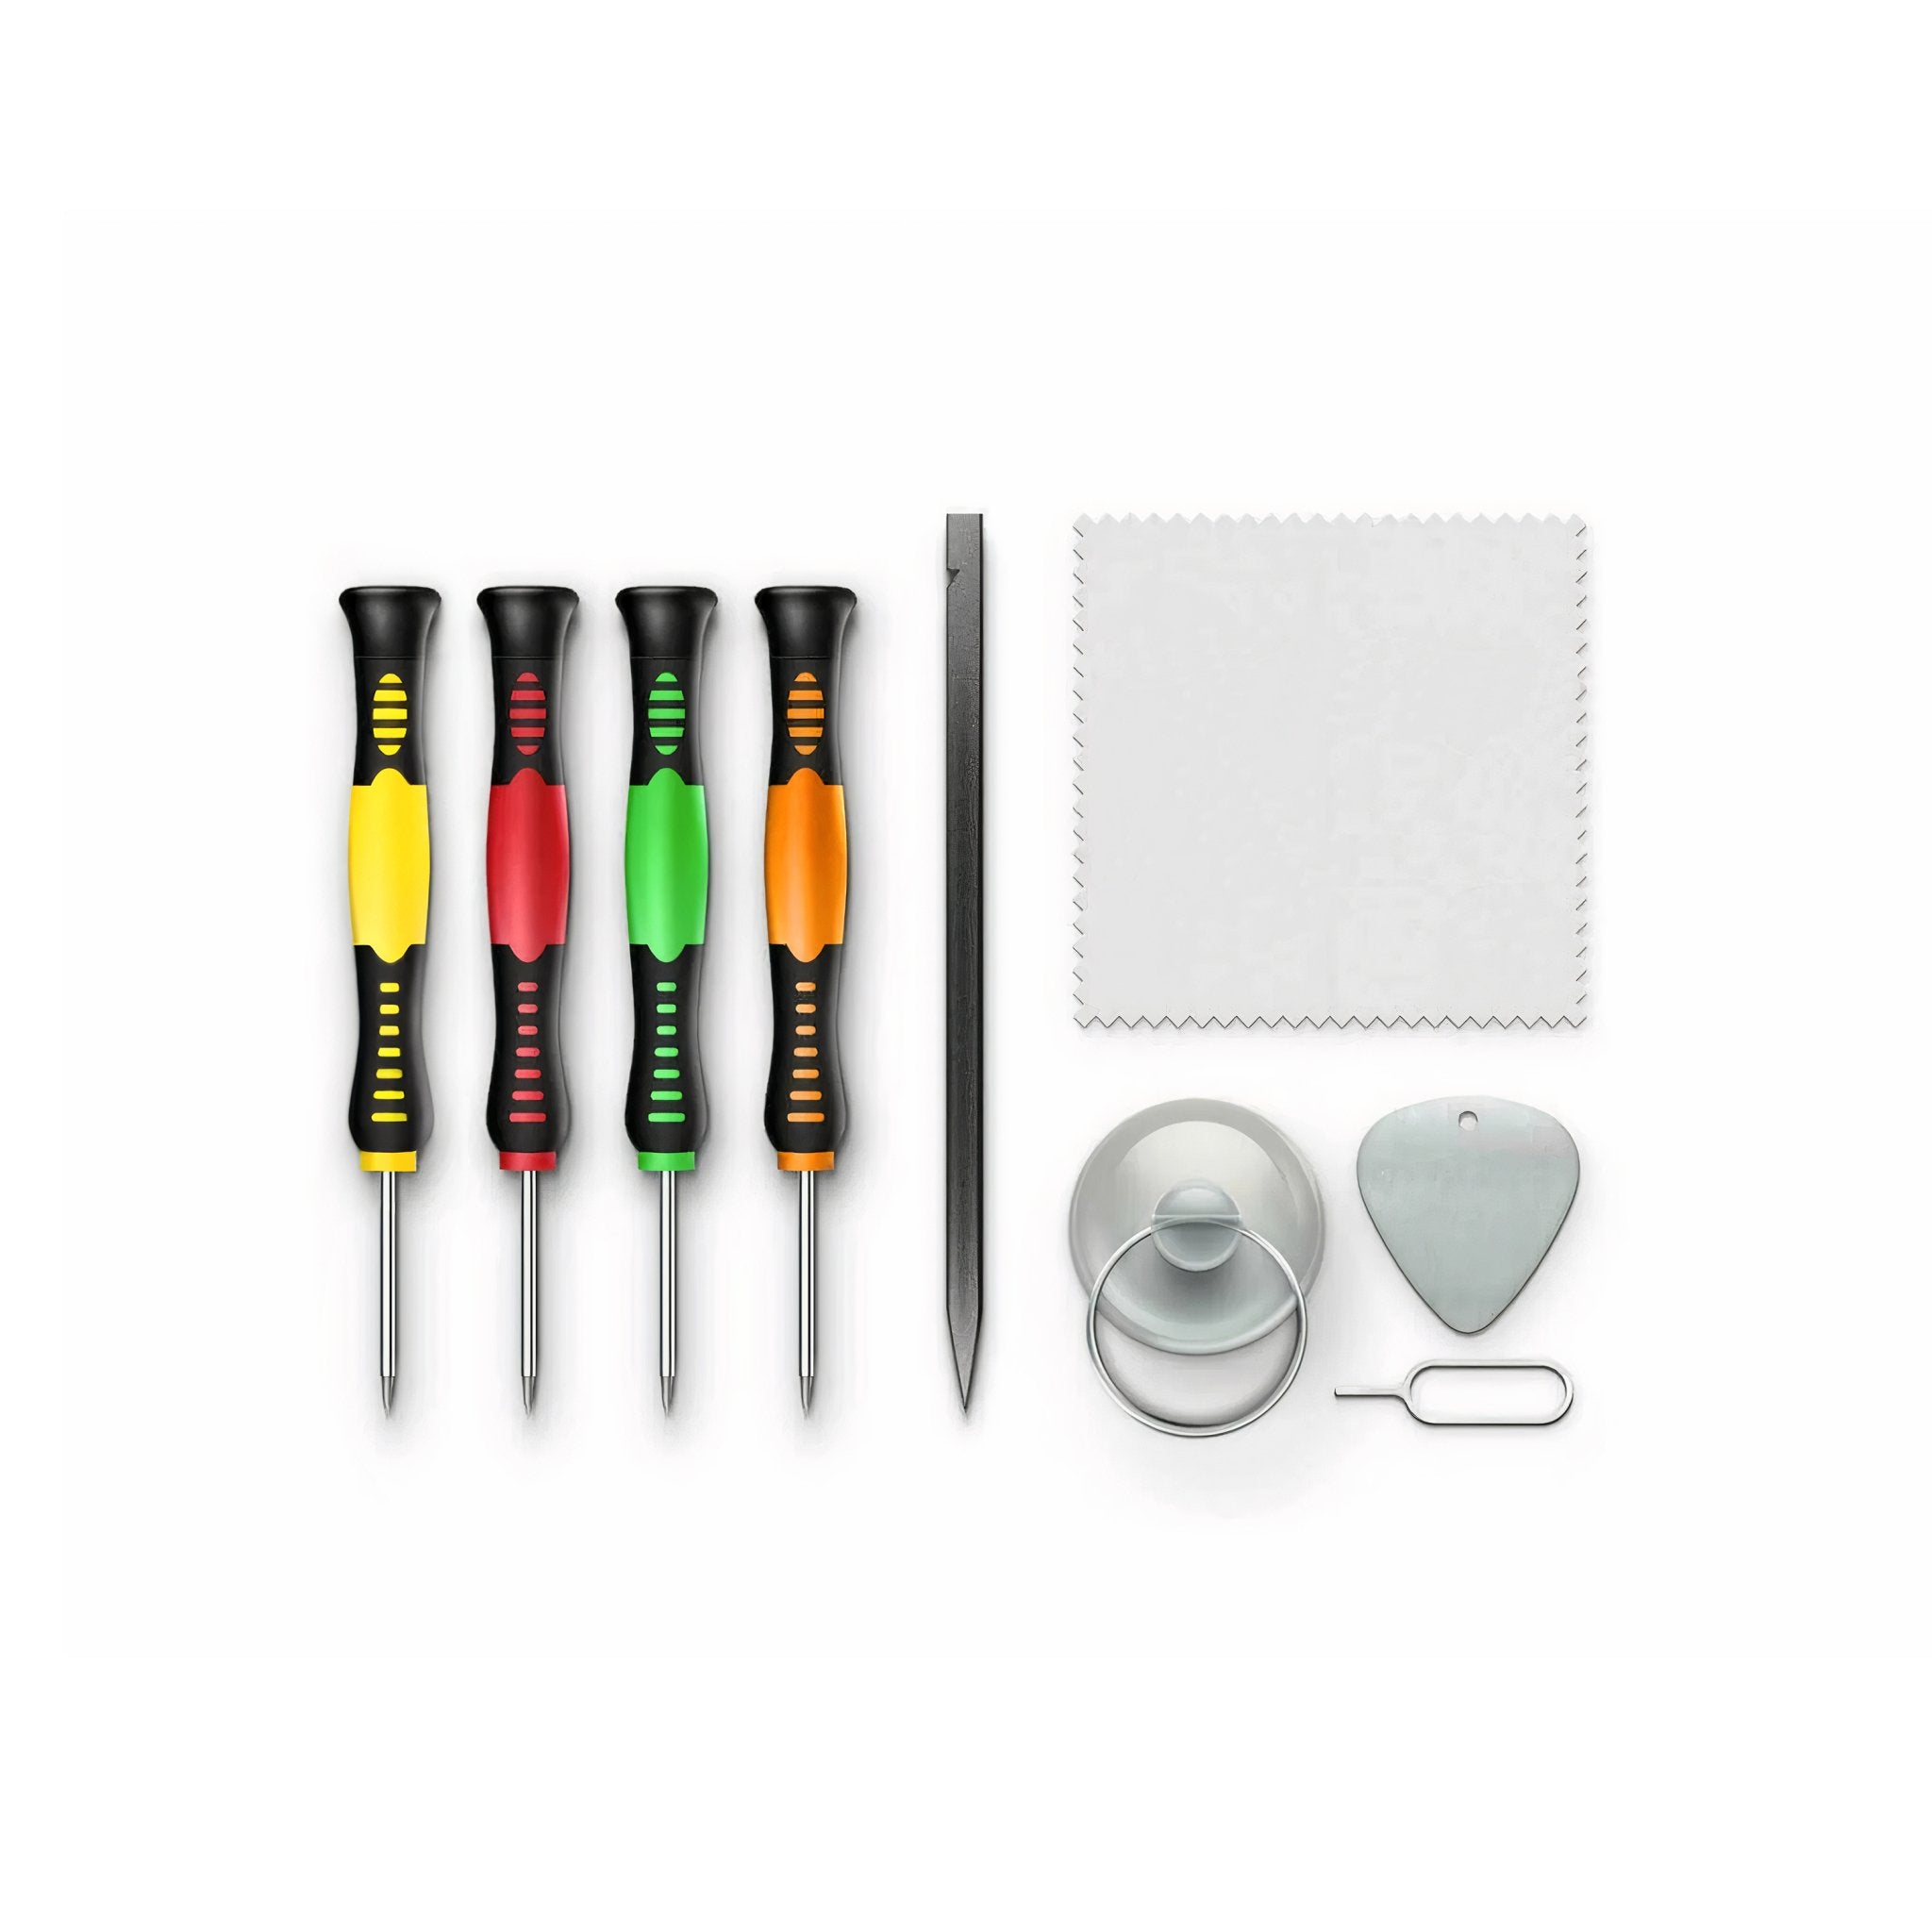 iPhone 6s Plus Battery Replacement Kit - FixProvider